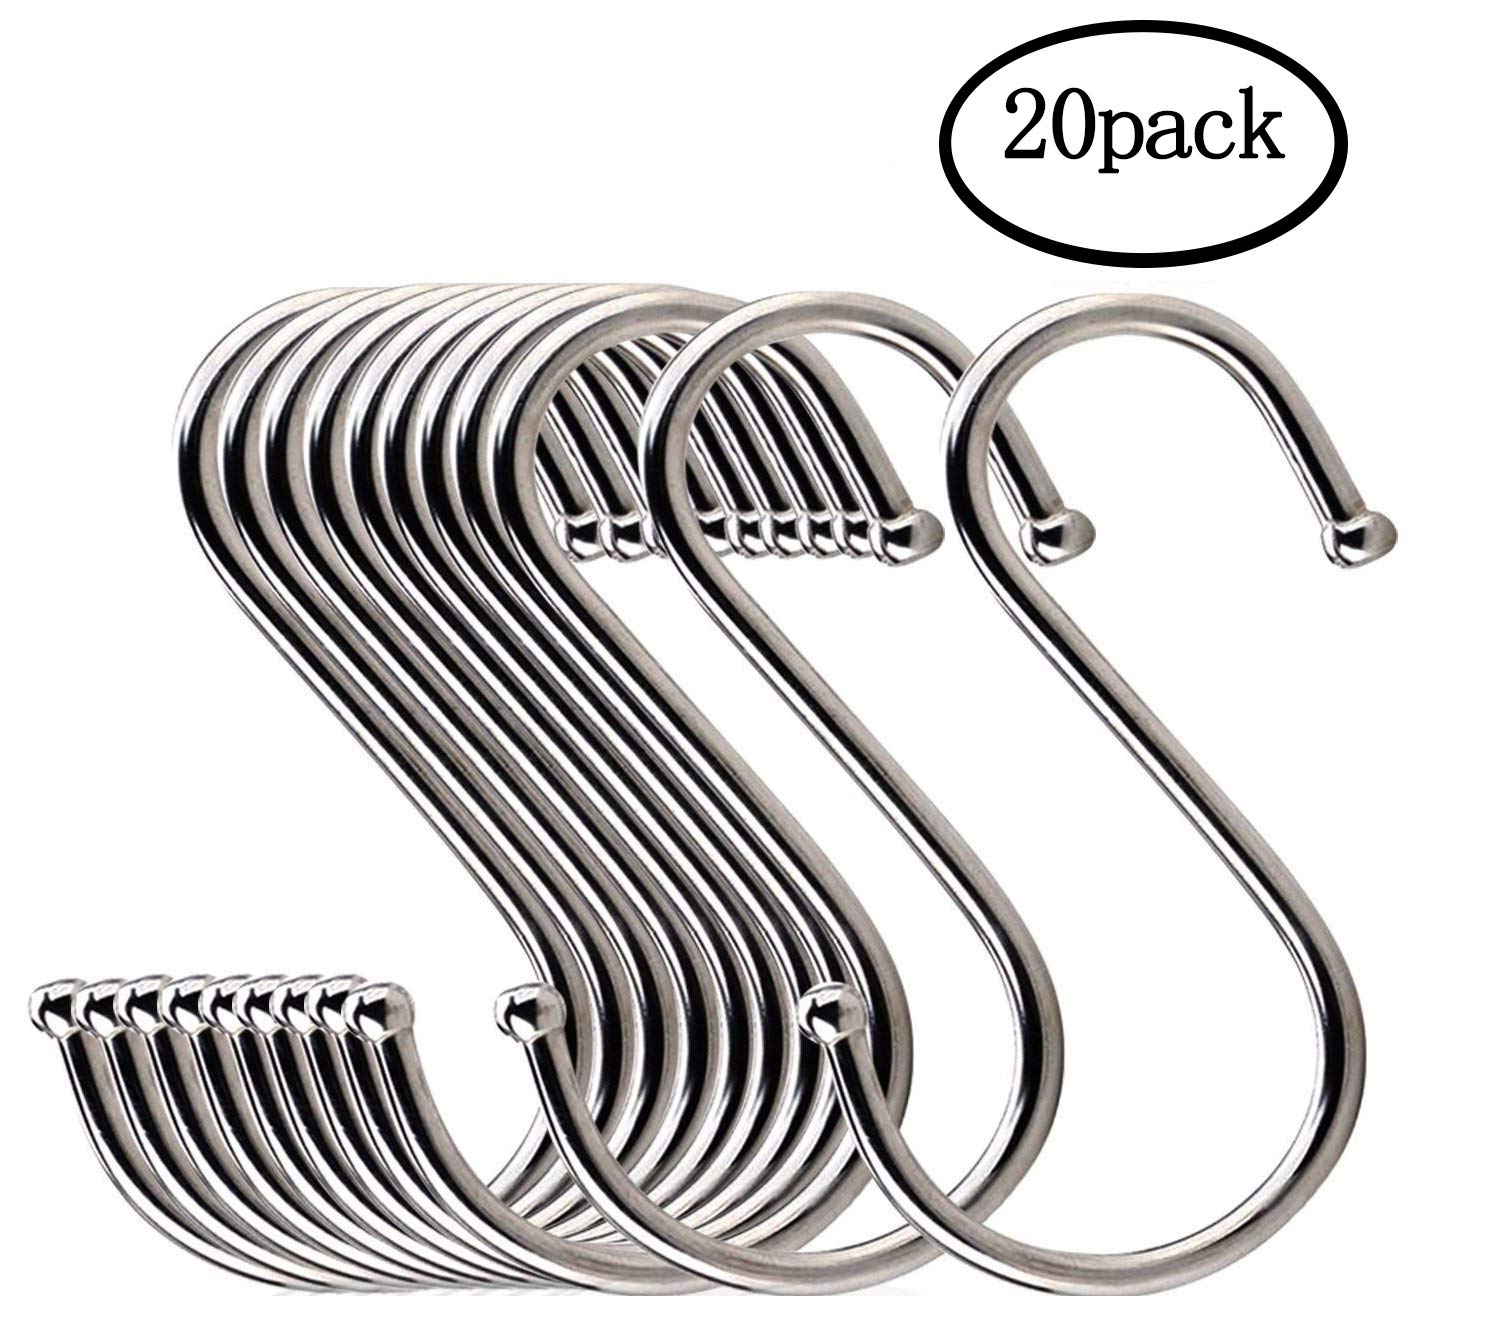 WOVTE Stainless Steel S Shaped Hanging Hooks Kitchen Pot Pan Hanger Clothes Storage Rack Large Pack of 20